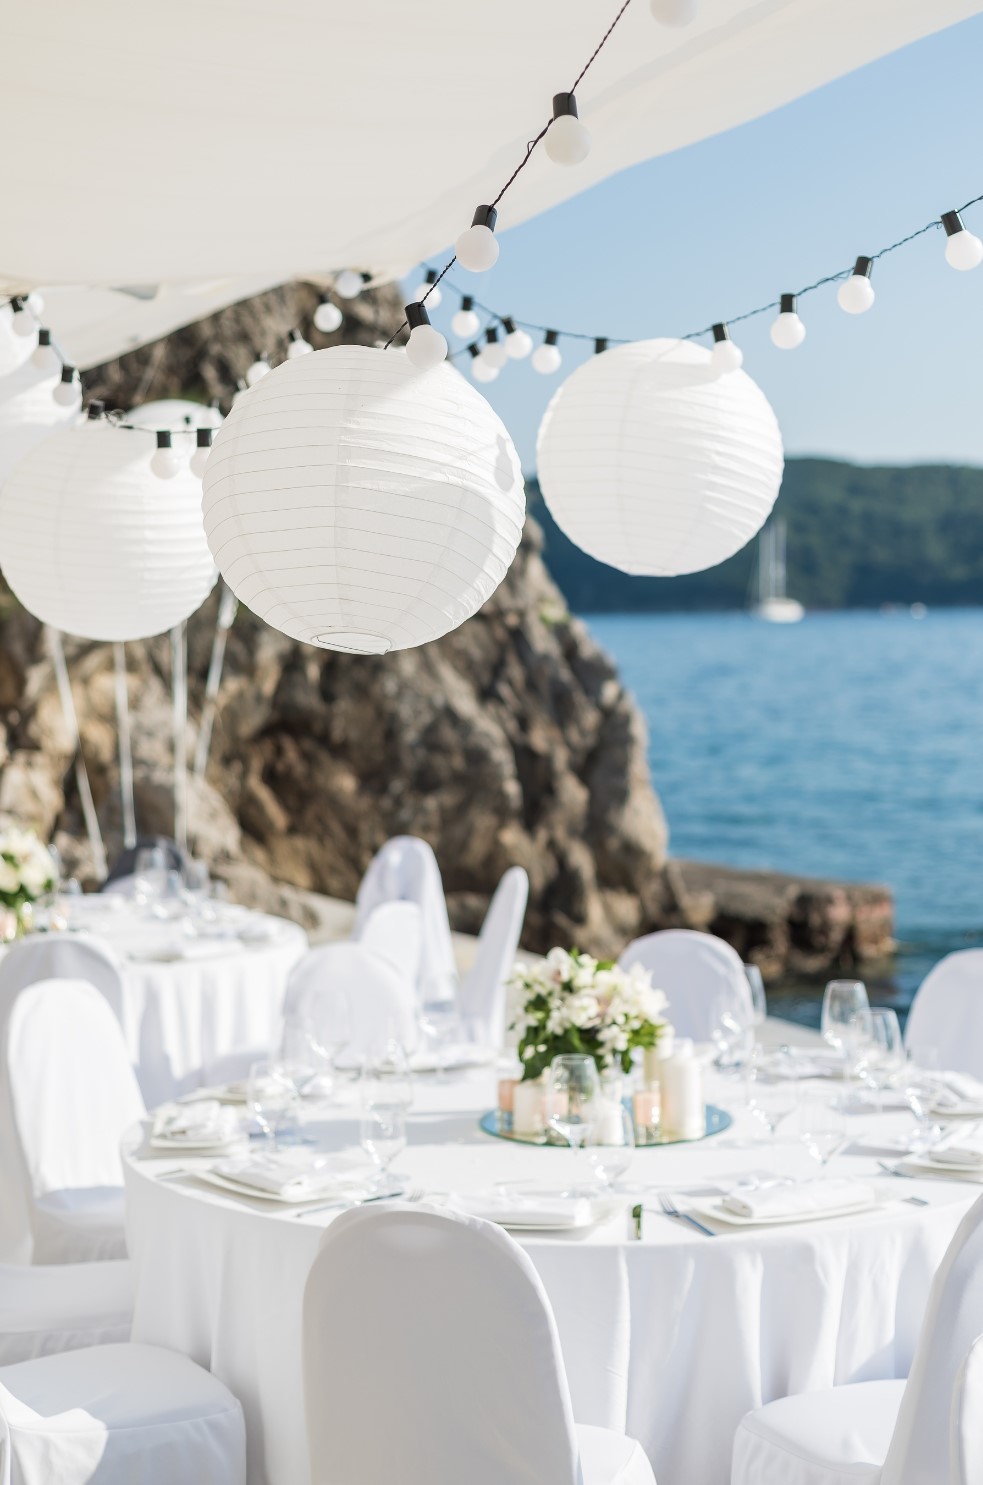 Dining table at a beachside wedding venue 